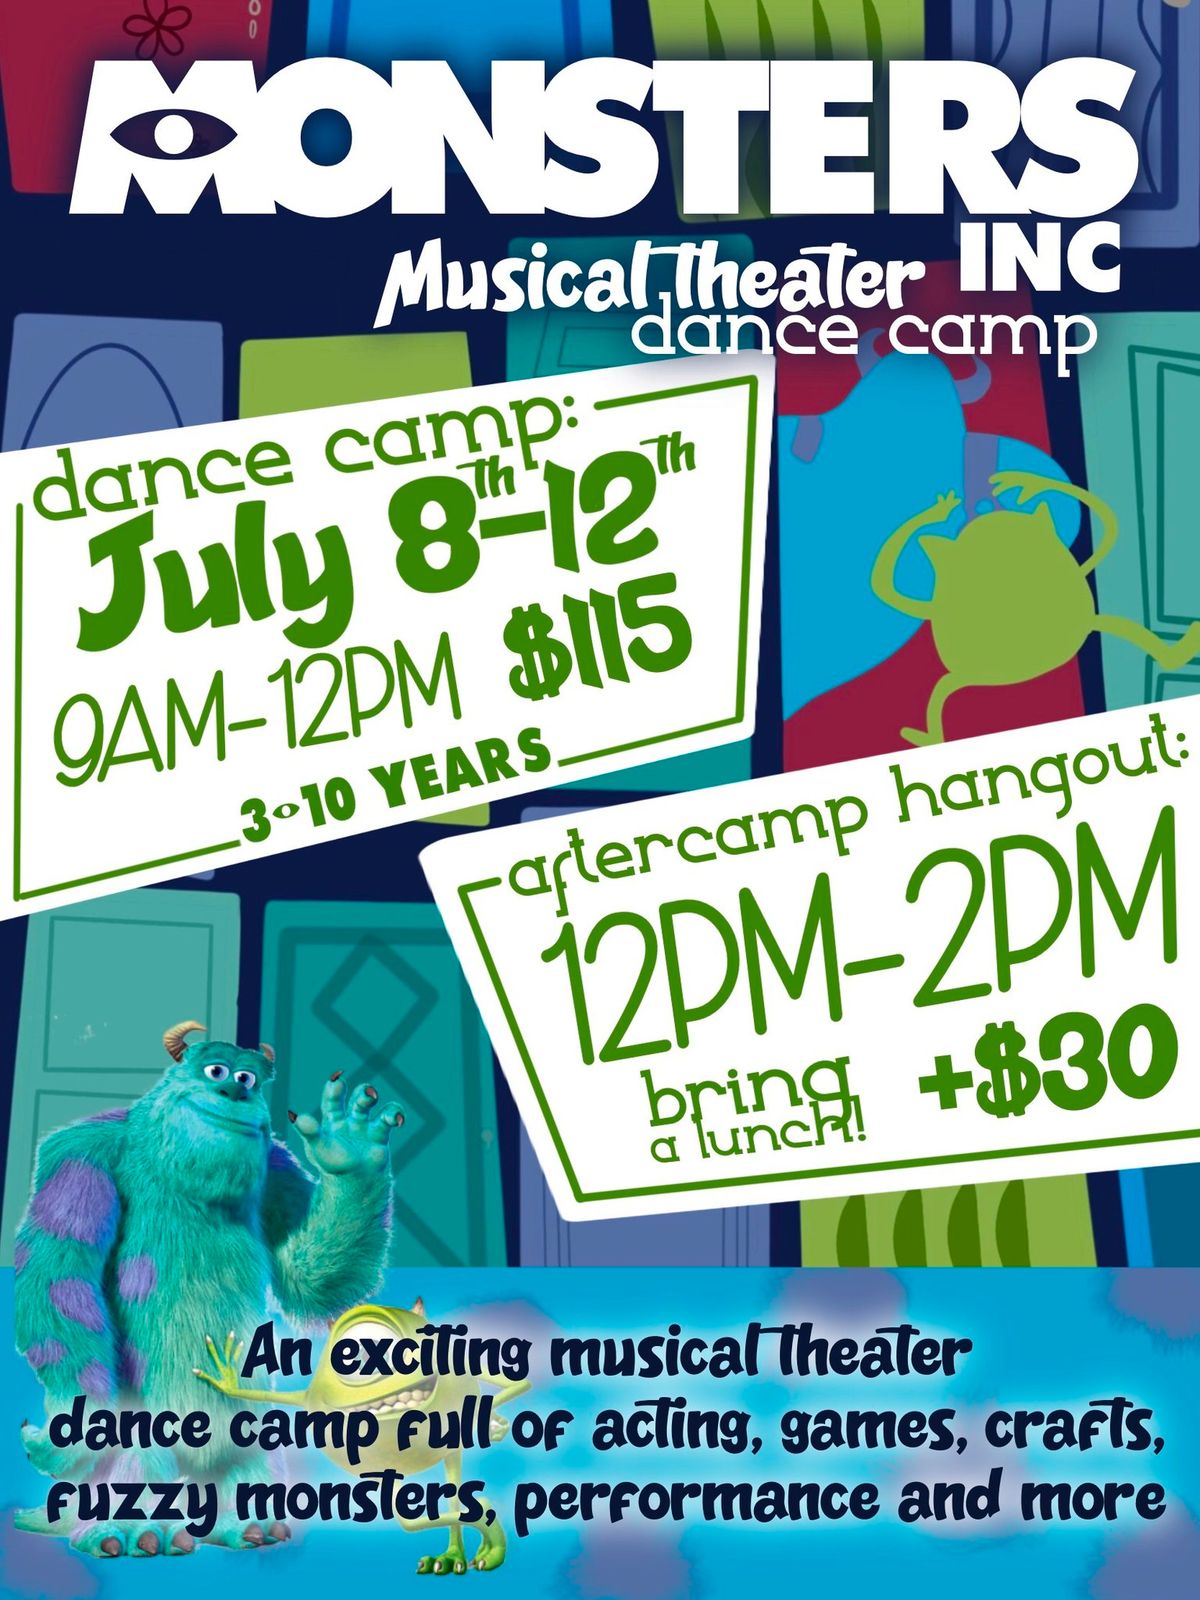 MONSTERS INC MUSICAL THEATER DANCE CAMP